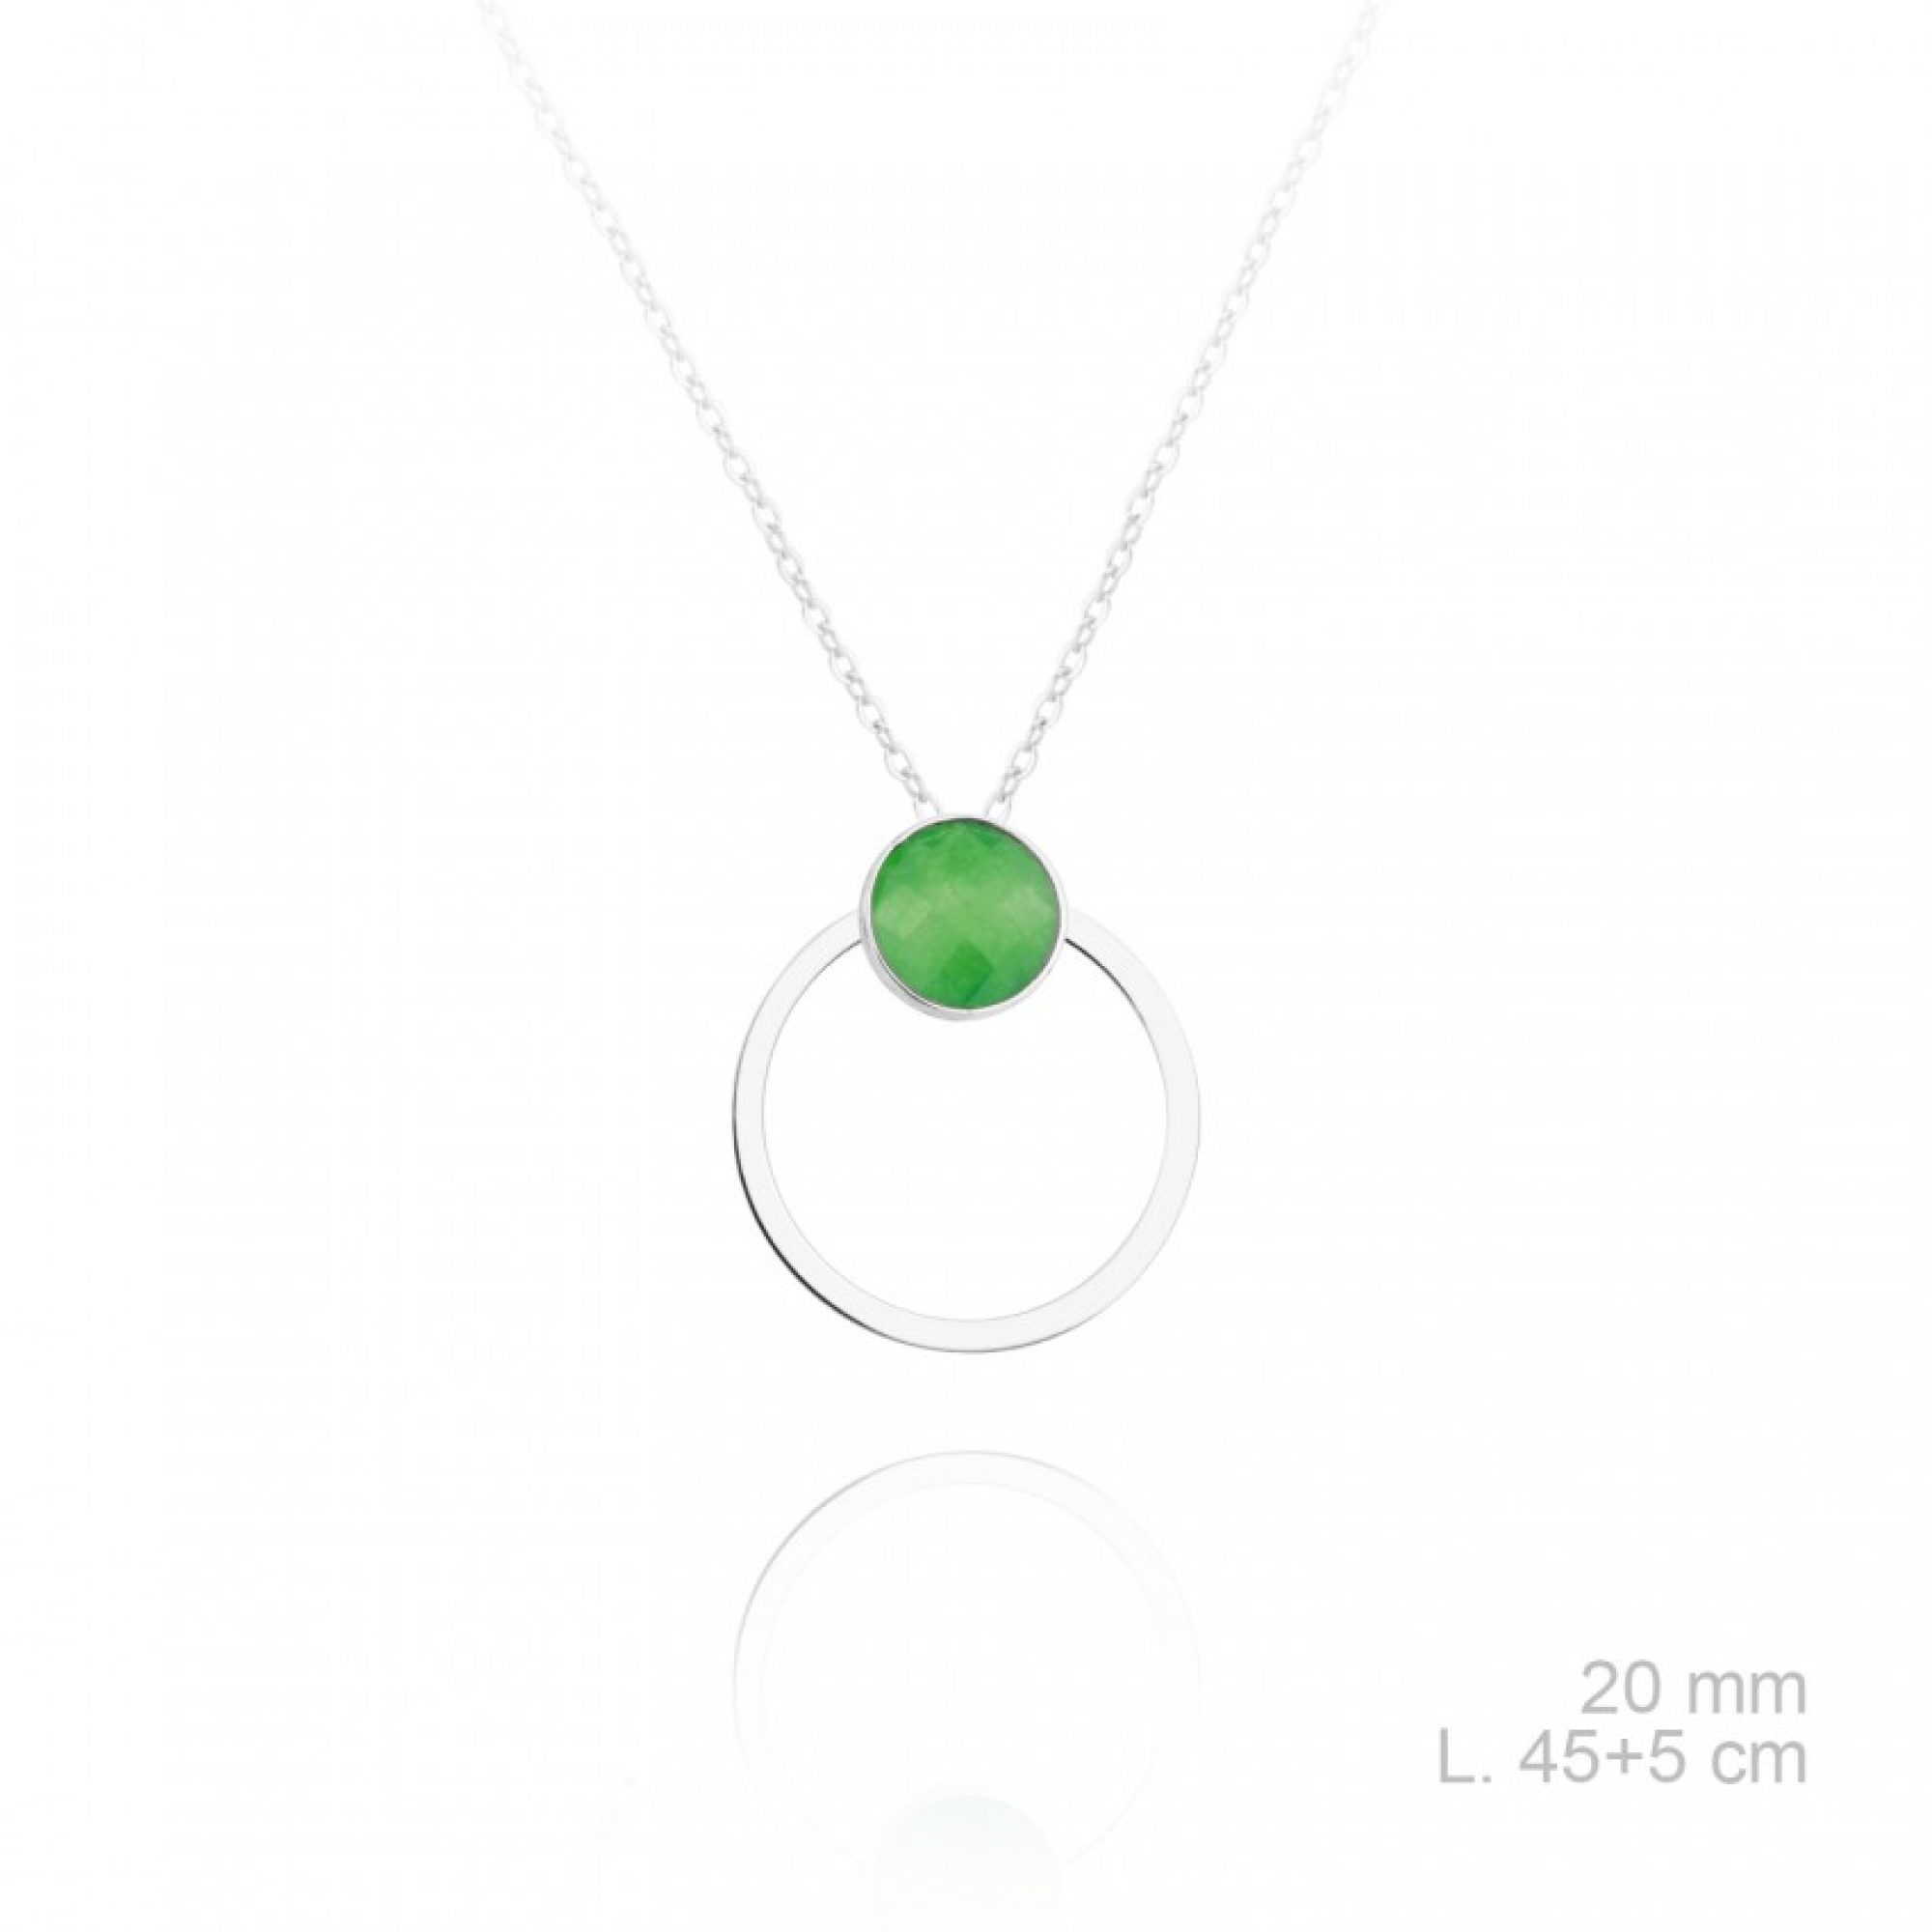 Silver circle necklace with green stone